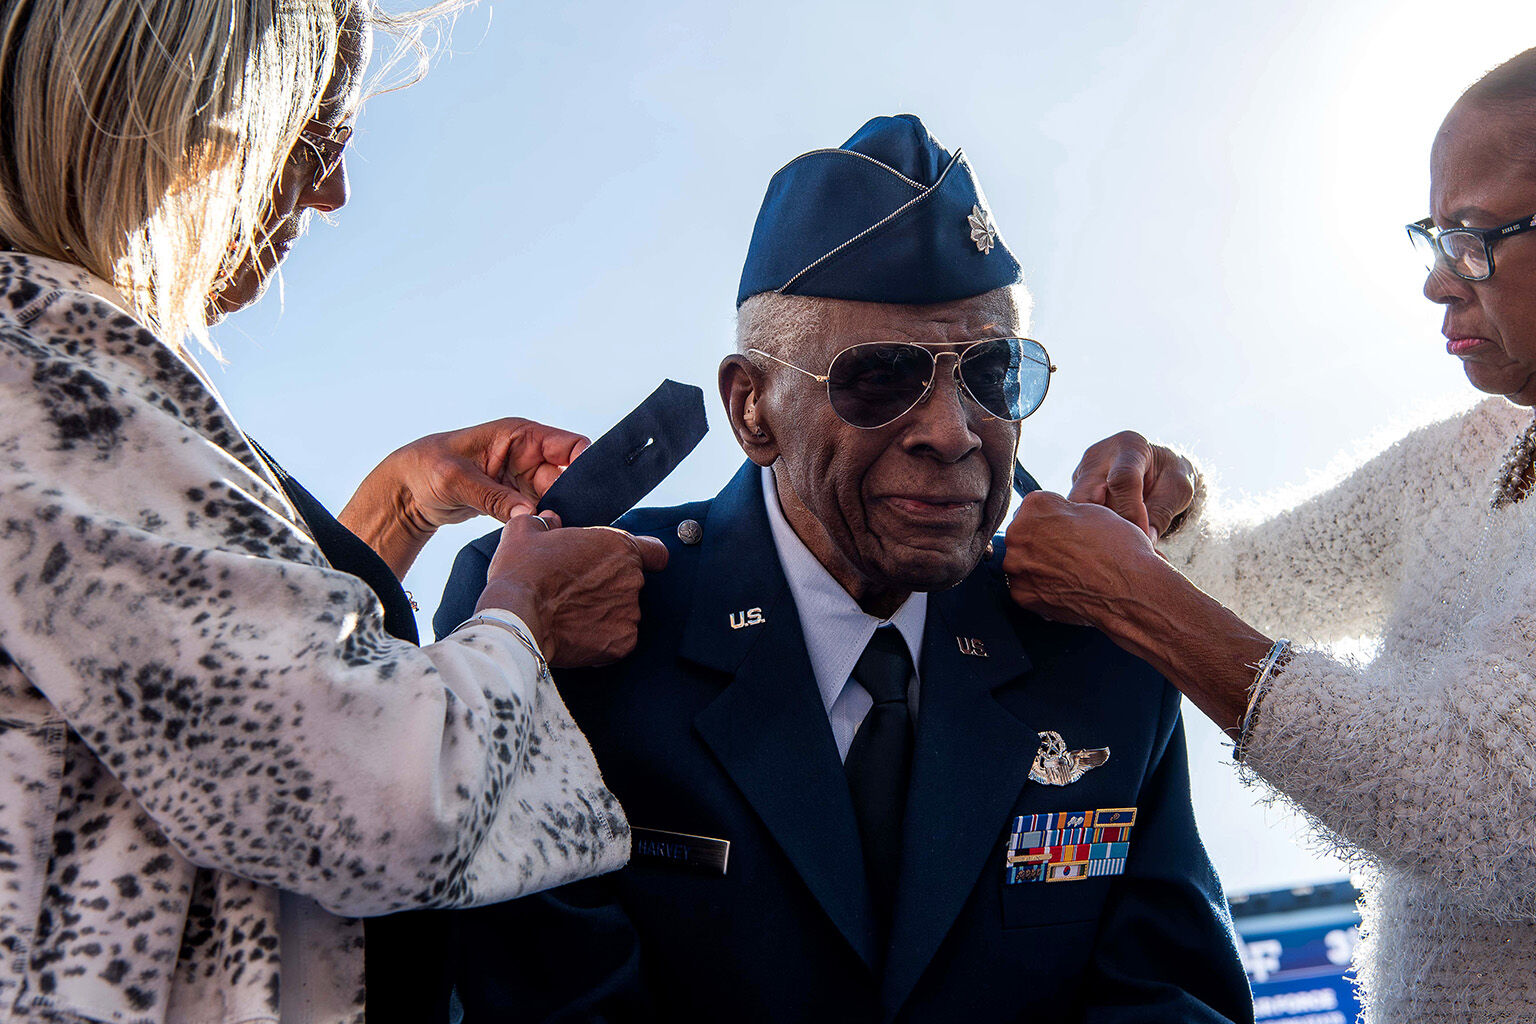 WWII airpower legend receives honorary promotion | News | enidnews.com